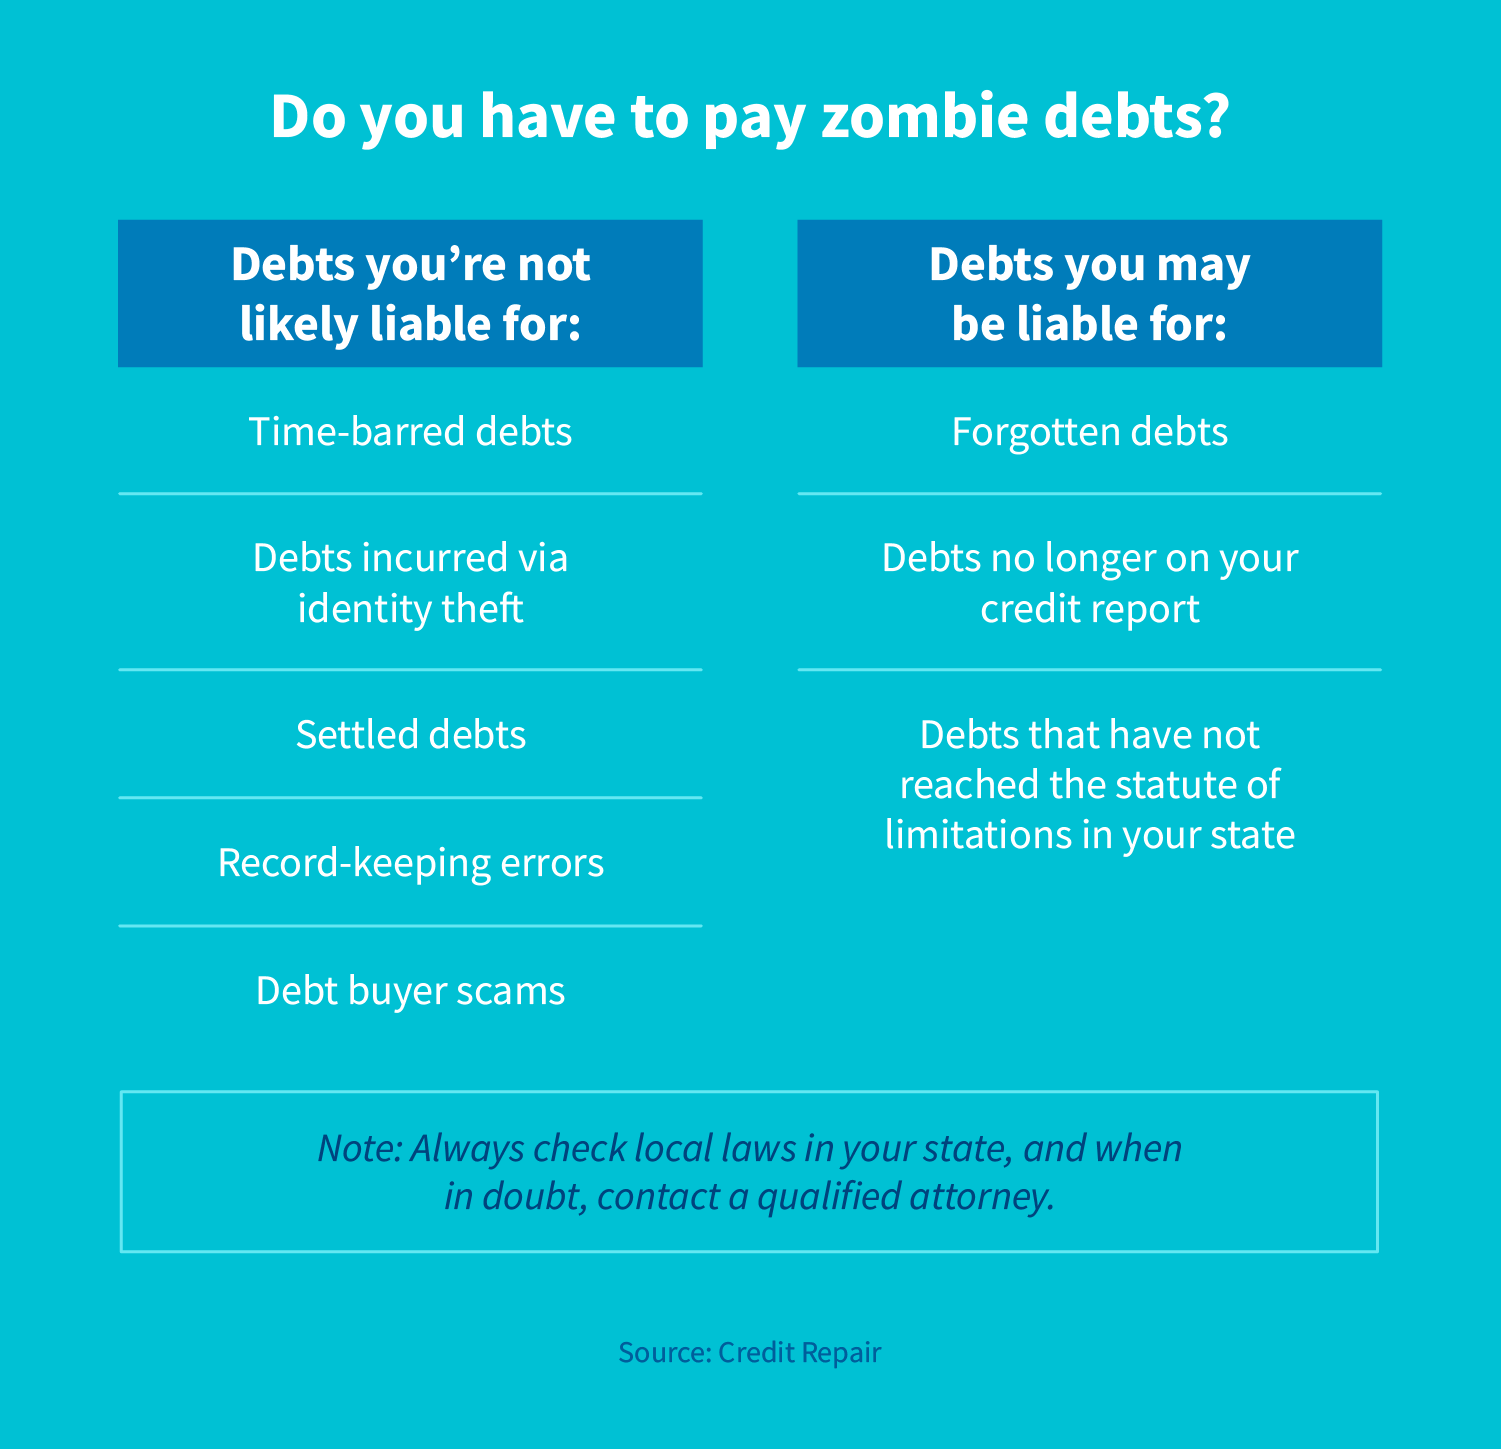 Do you have to pay zombie debt?